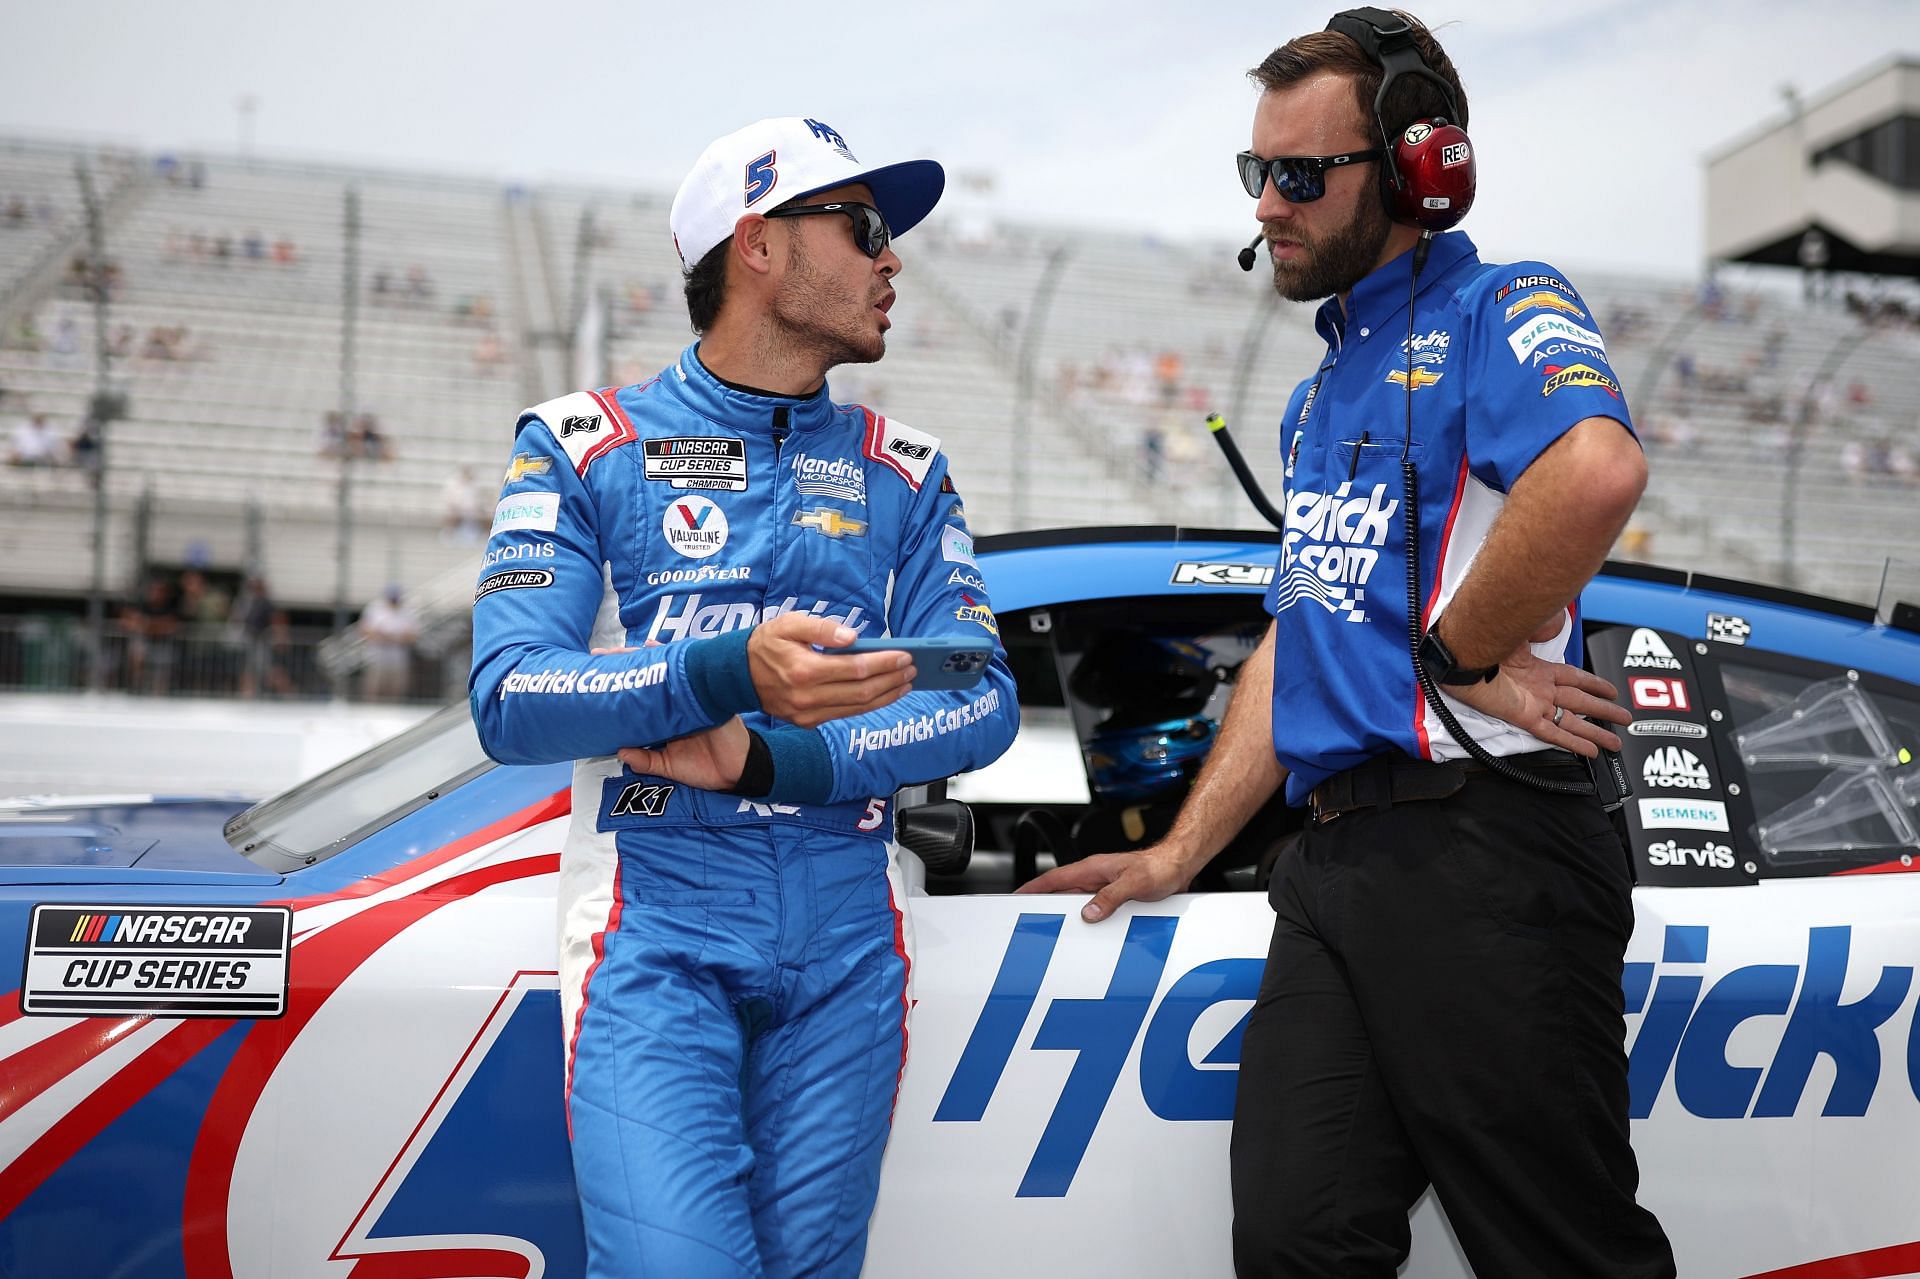 Kyle Larson and a crew member talk on the grid during qualifying for the NASCAR Cup Series Ambetter 301 at New Hampshire Motor Speedway